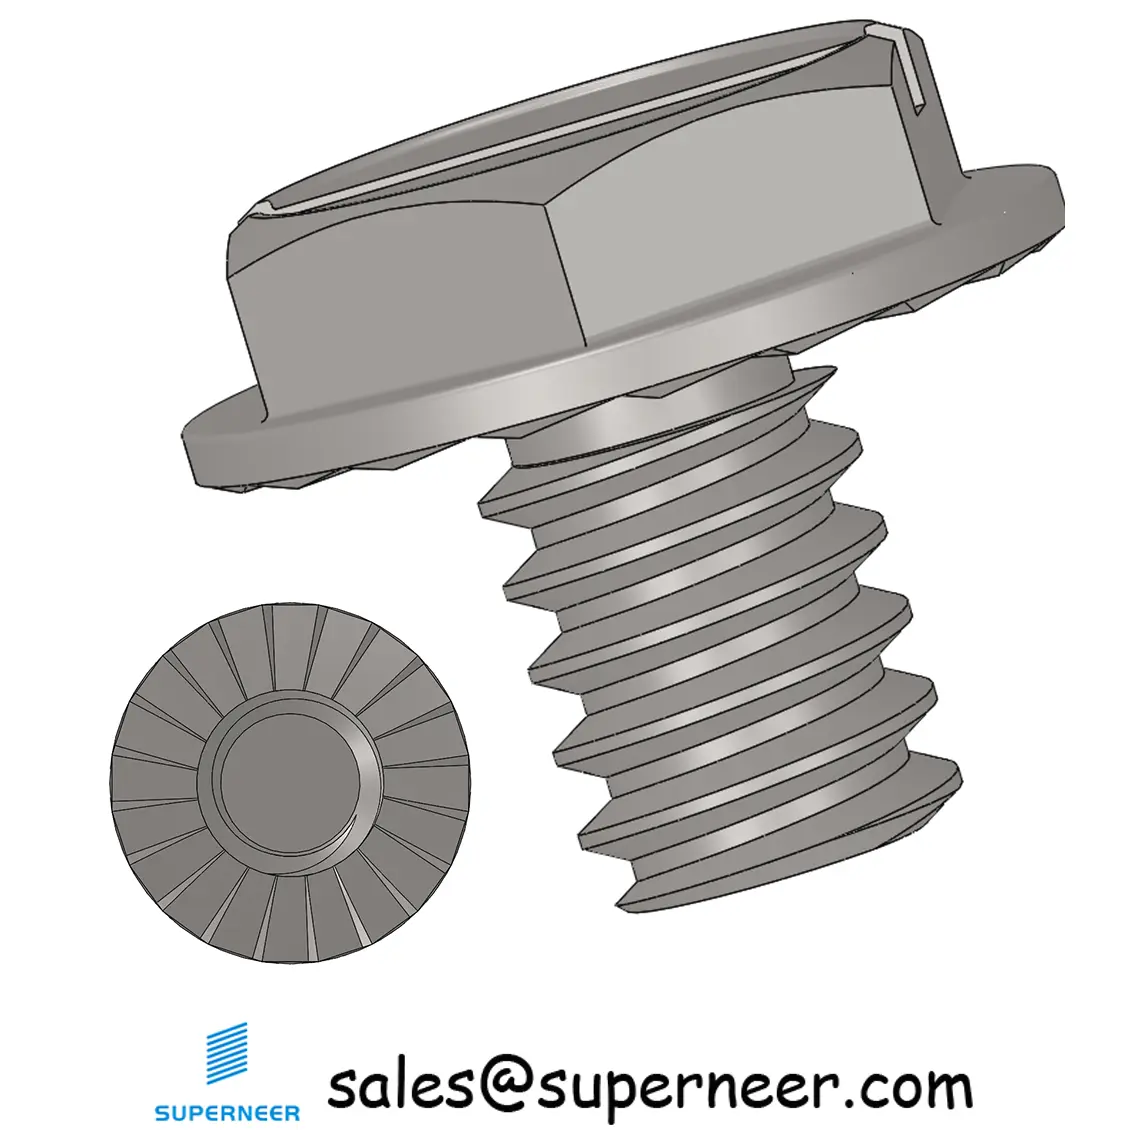 6-32 x 3/16" Indented Hex Washer Serrated Head Slotted Machine Screw SUS304 Stainless Steel Inox